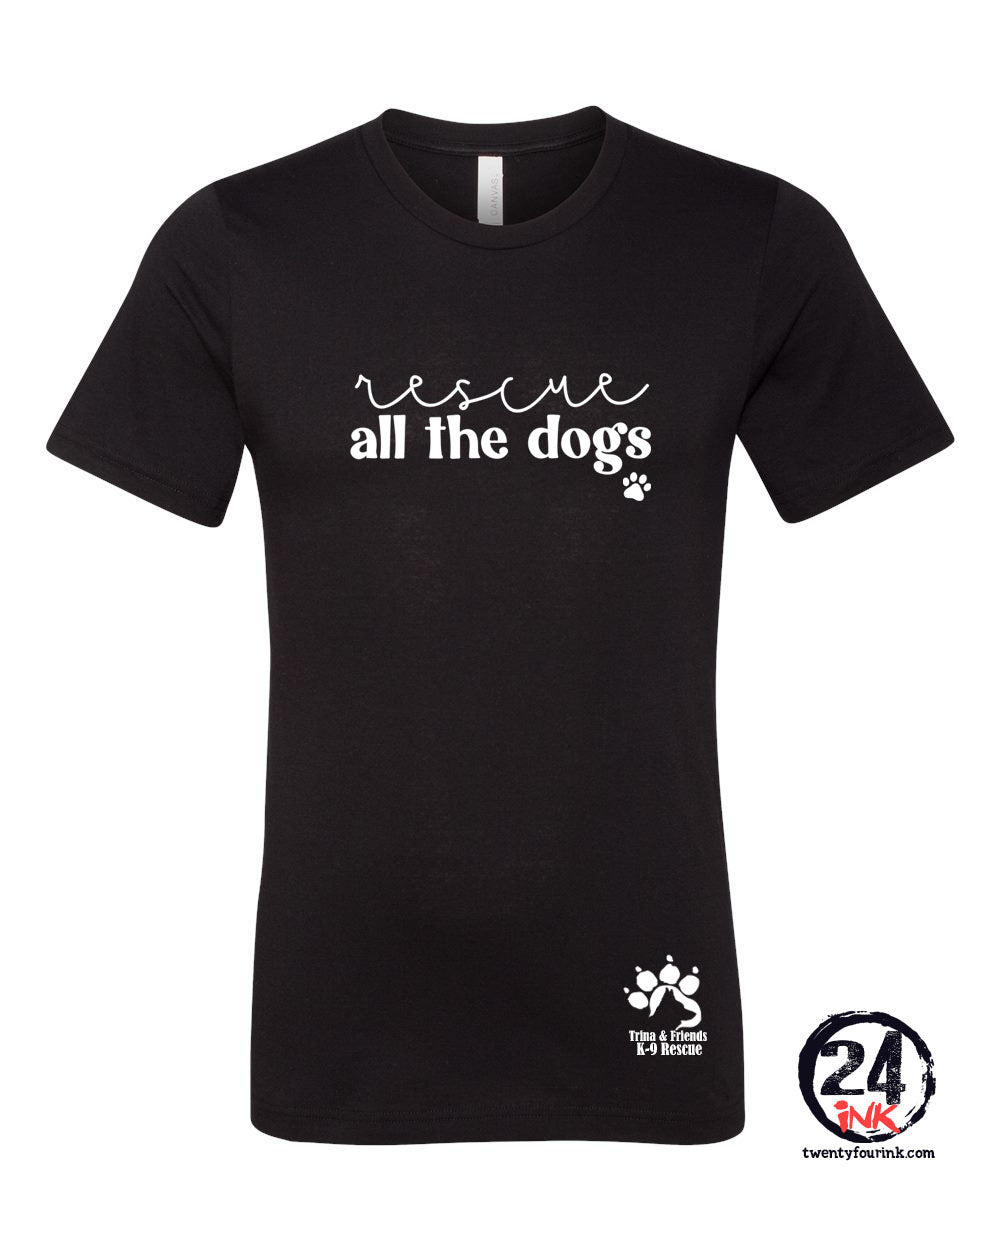 Rescue all the dogs t-Shirt